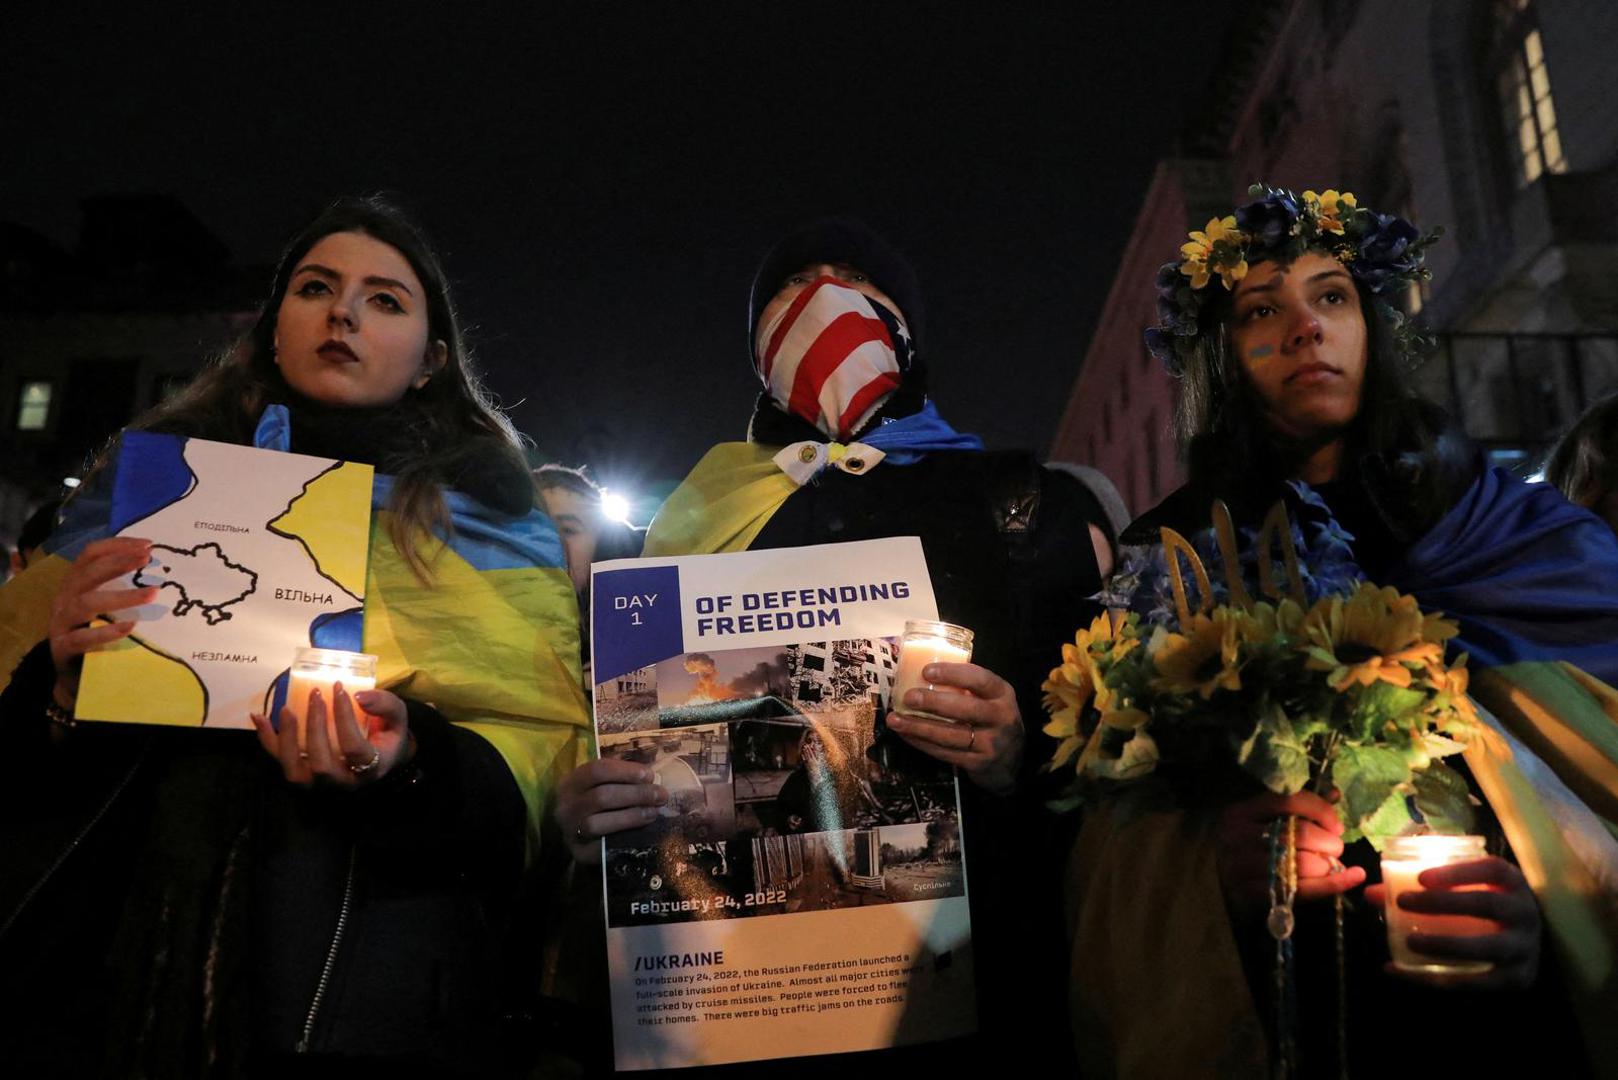 People attend a candlelight vigil in front of the Russian embassy marking the one year anniversary of the Russian invasion of Ukraine, in New York City, New York, U.S. February 23, 2023. REUTERS/Irynka Hromotska NO RESALES. NO ARCHIVES Photo: Stringer/REUTERS